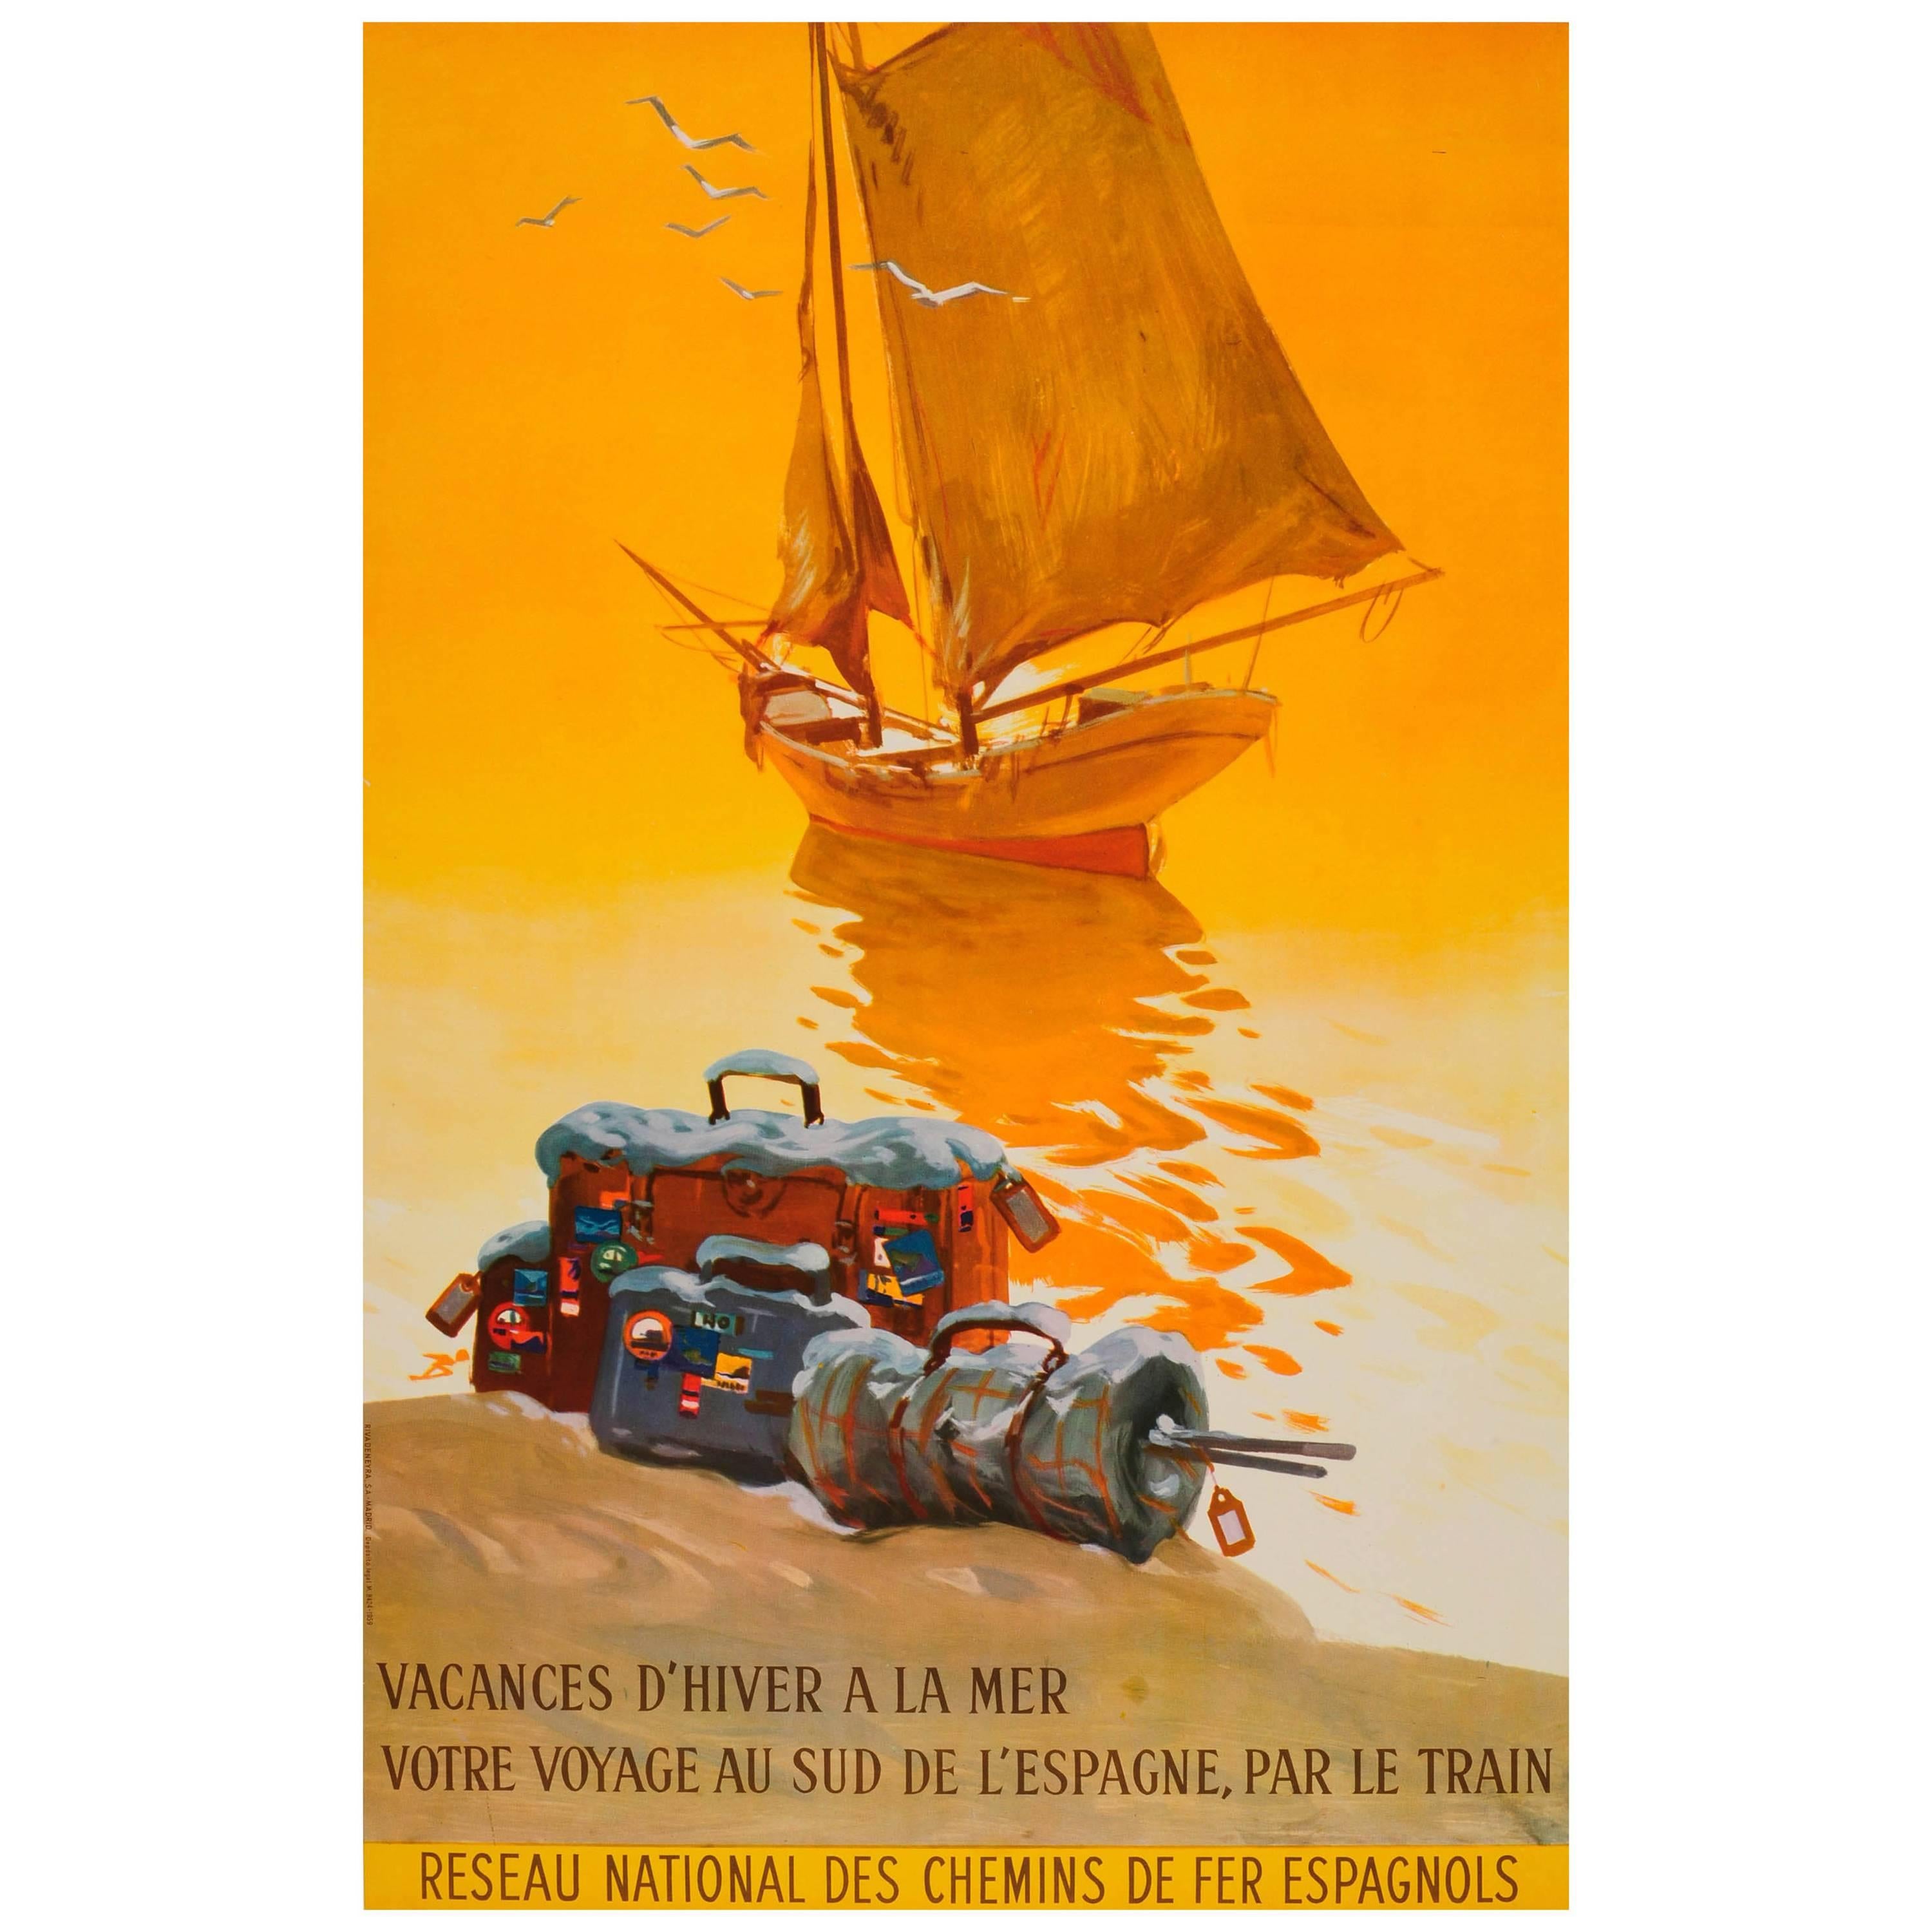 Original Vintage Railway Travel Poster for Winter Holidays by the Sea in Spain For Sale